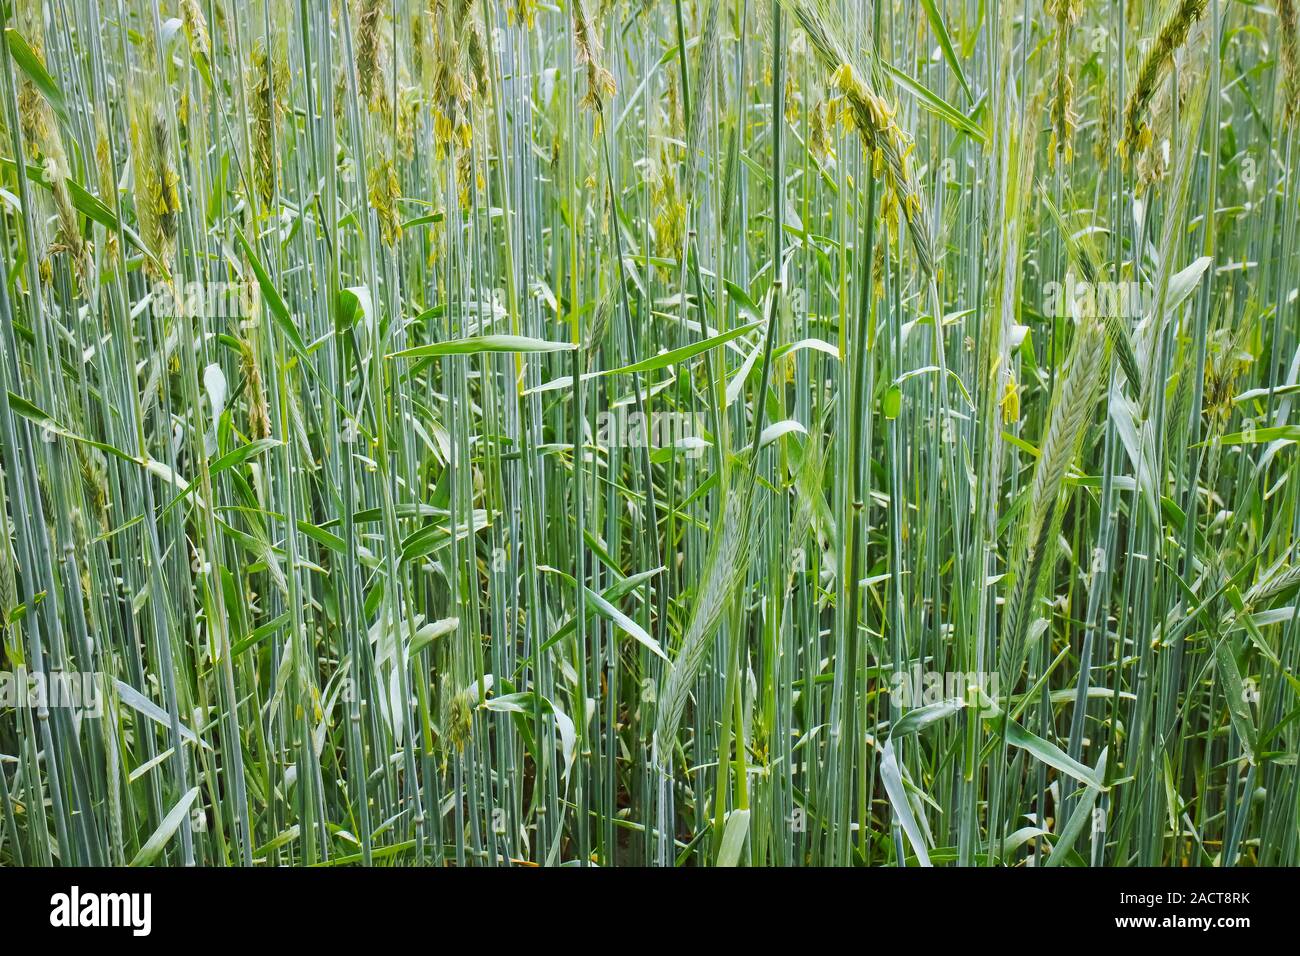 Young wheat crops on an agricultural field in spring. Stock Photo